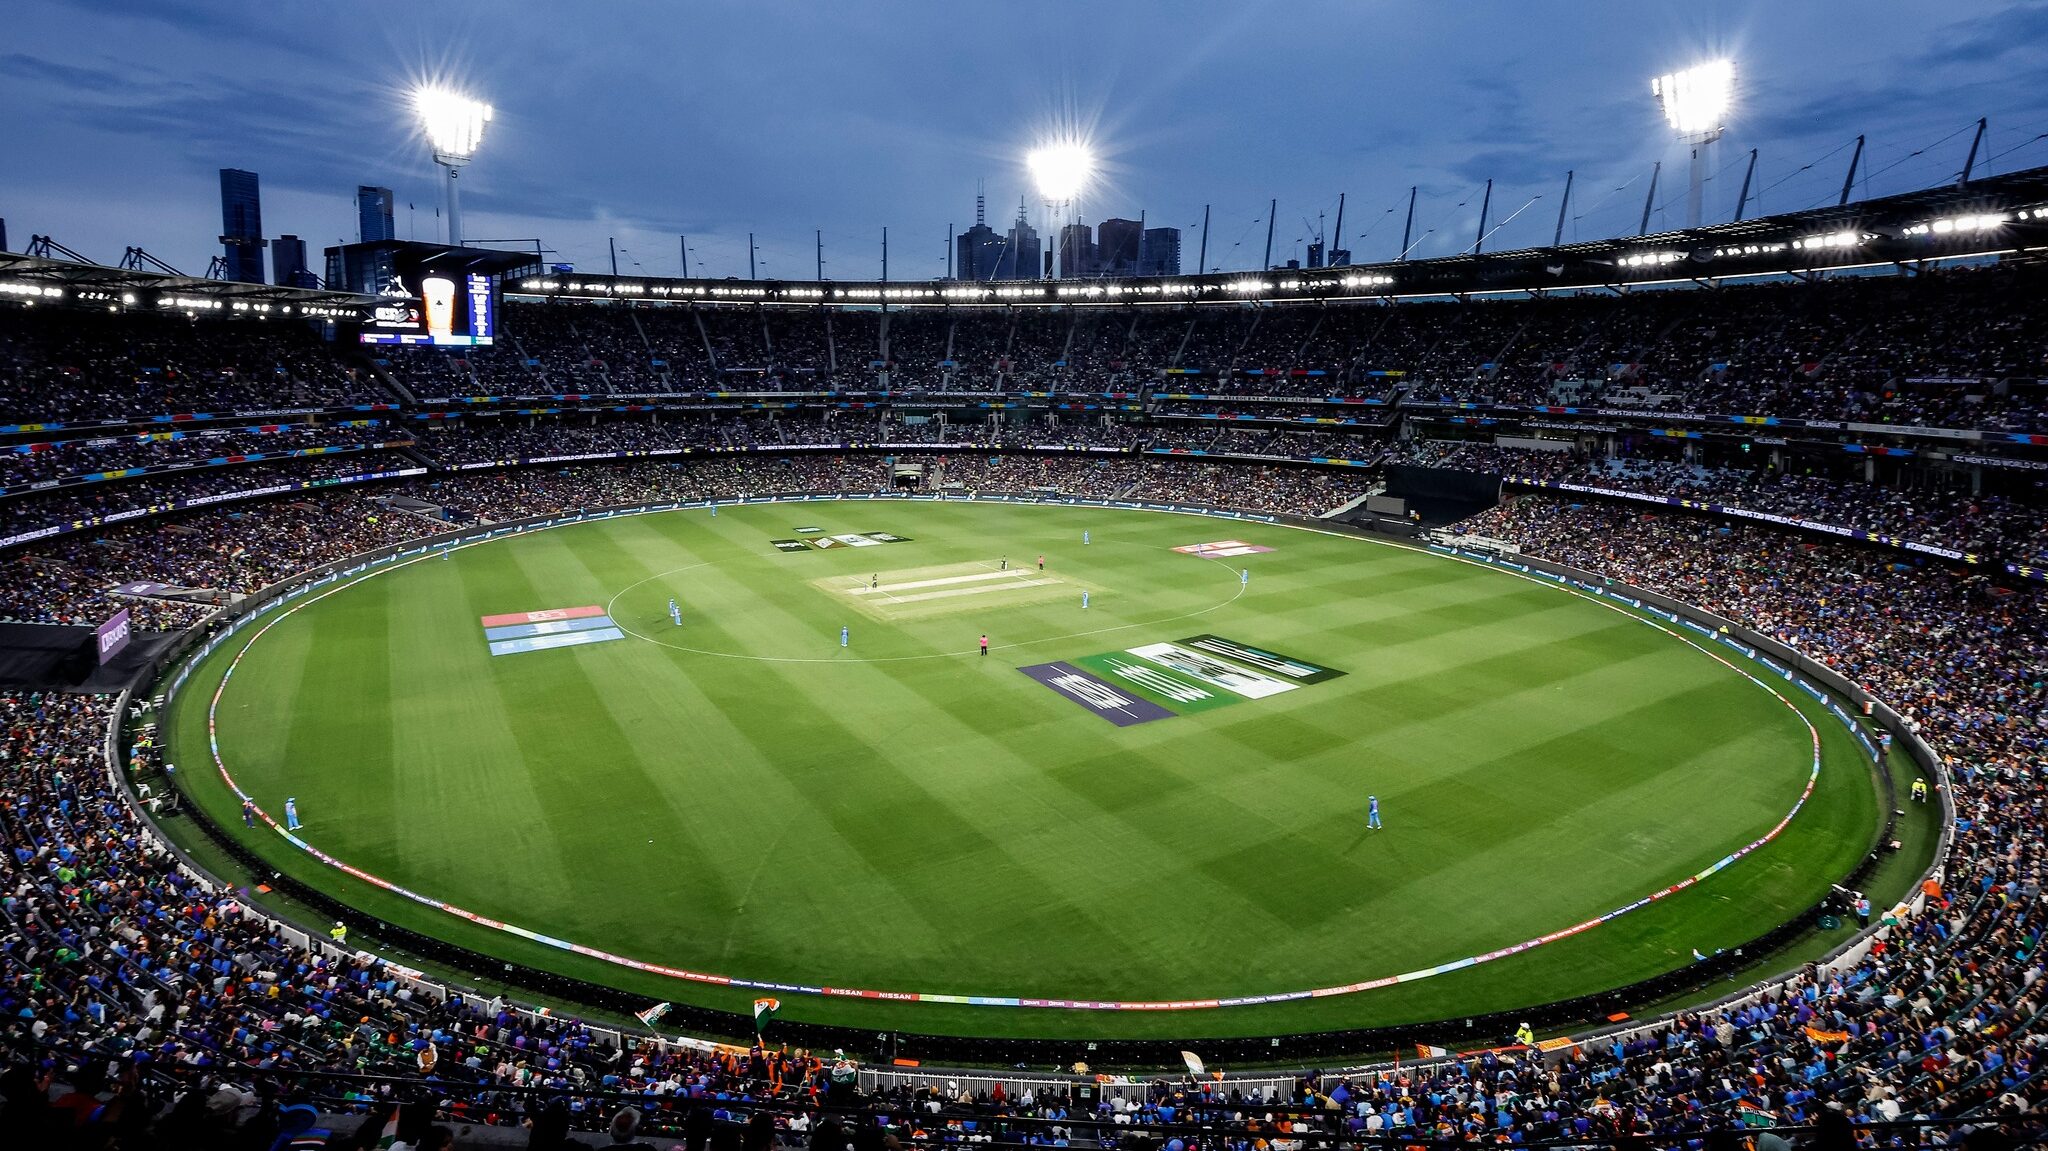 Melbourne Cricket Ground is one of the oldest cricket stadiums in the world. 